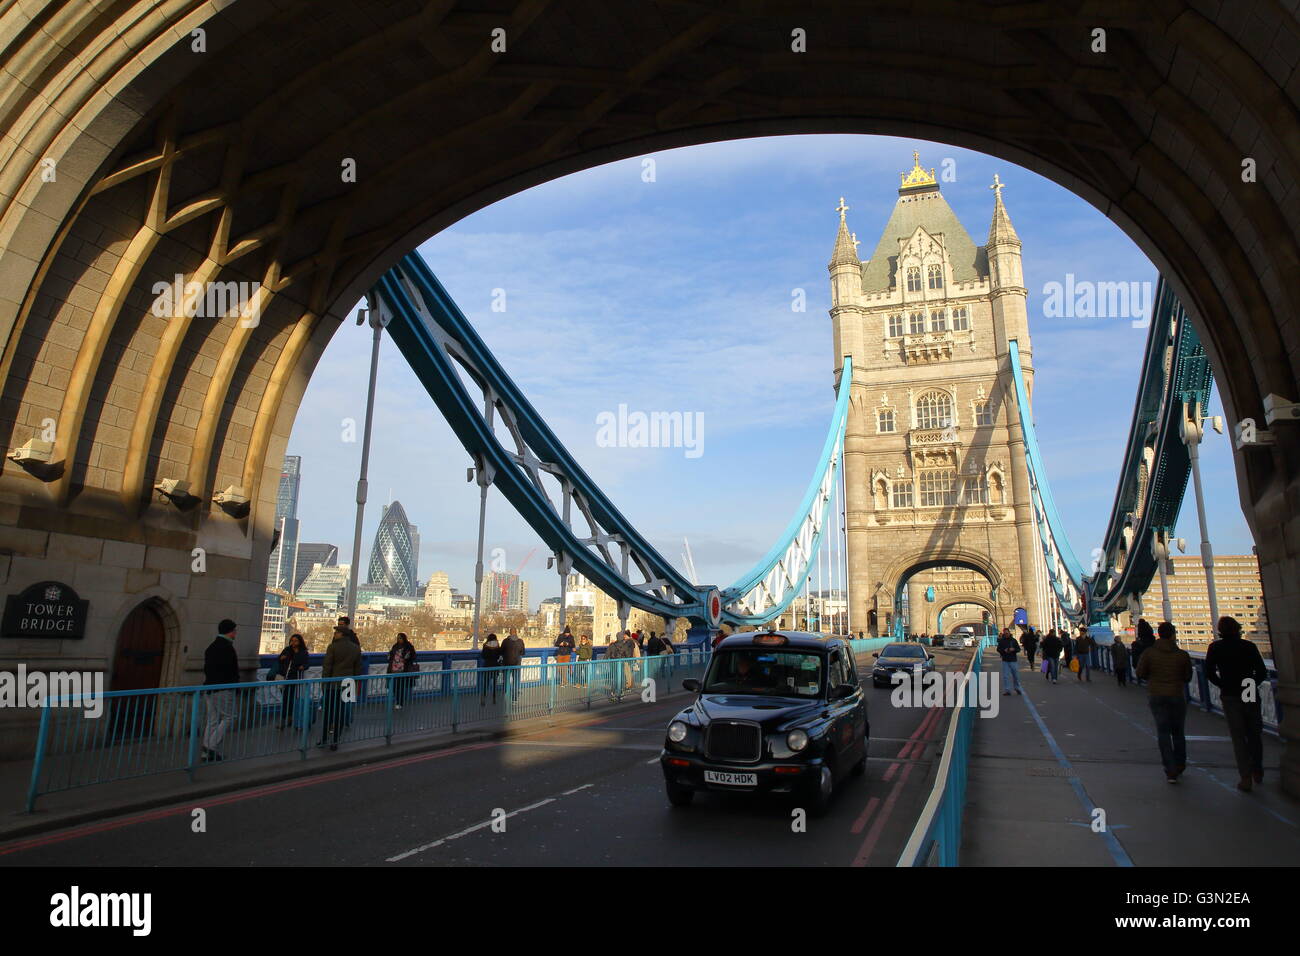 A black taxi cab on the Tower Bridge with Winter colors, London, Great Britain, the Gherkin in background Stock Photo